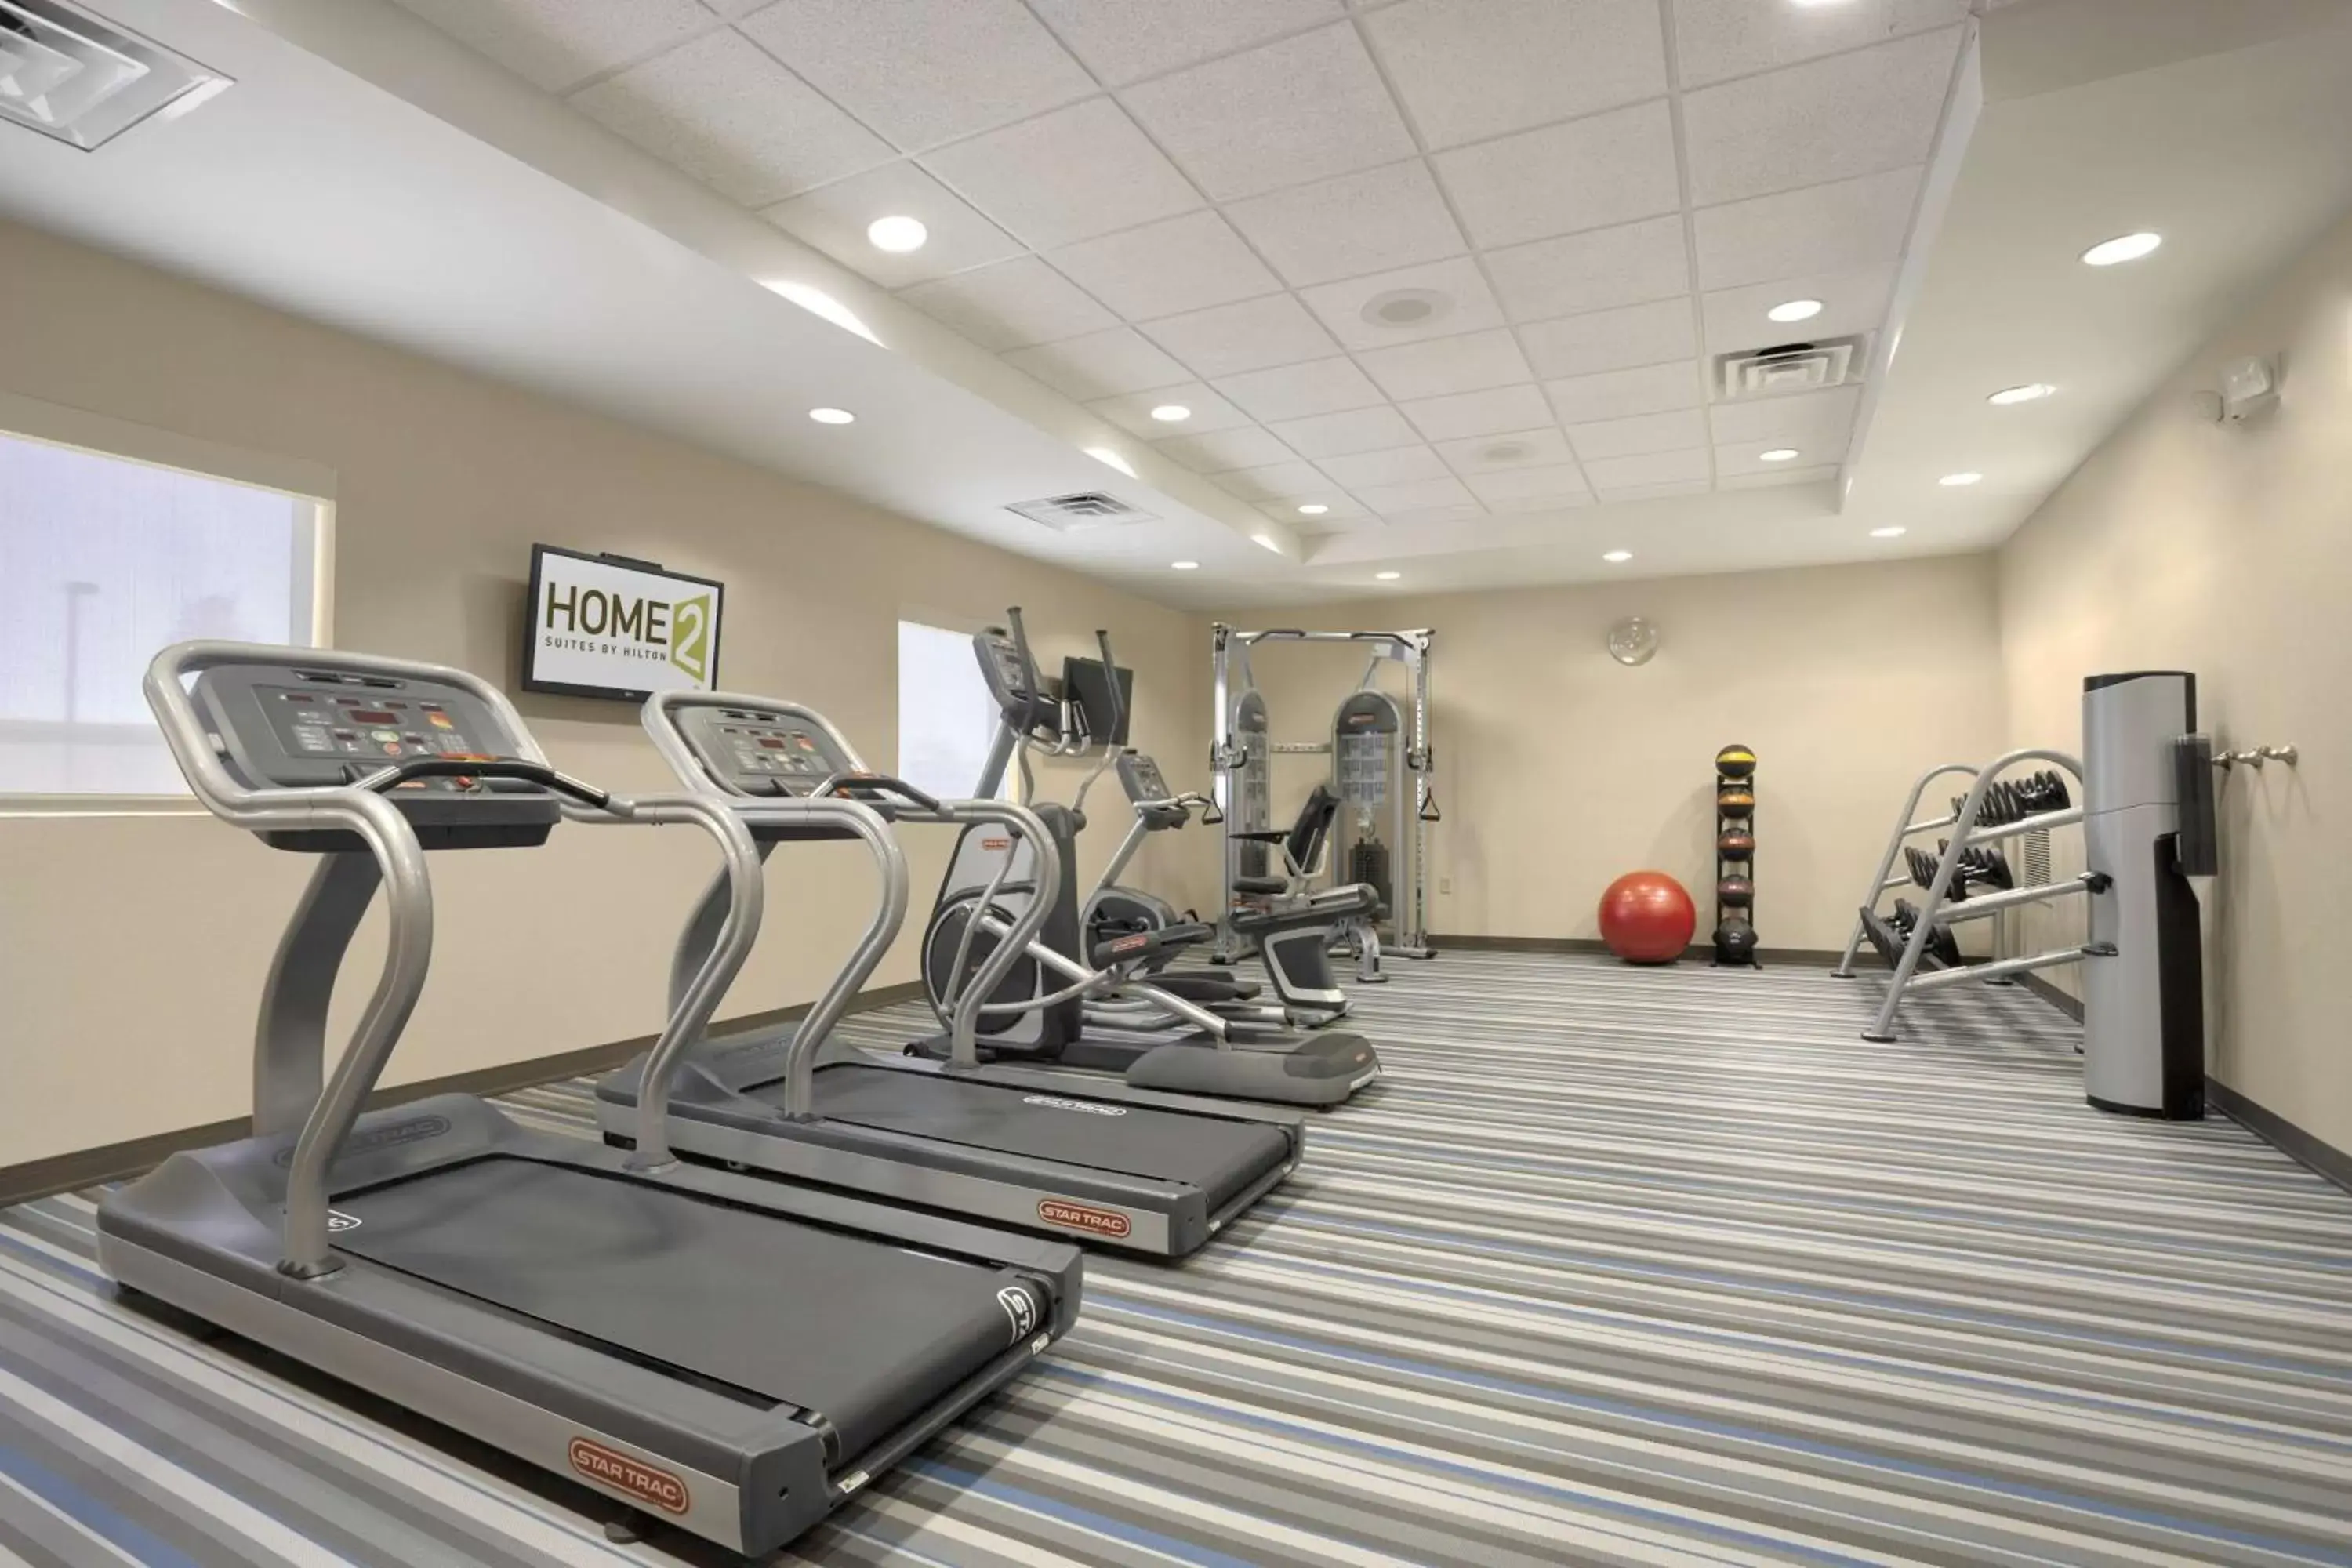 Fitness centre/facilities, Fitness Center/Facilities in Home2 Suites by Hilton Pittsburgh - McCandless, PA